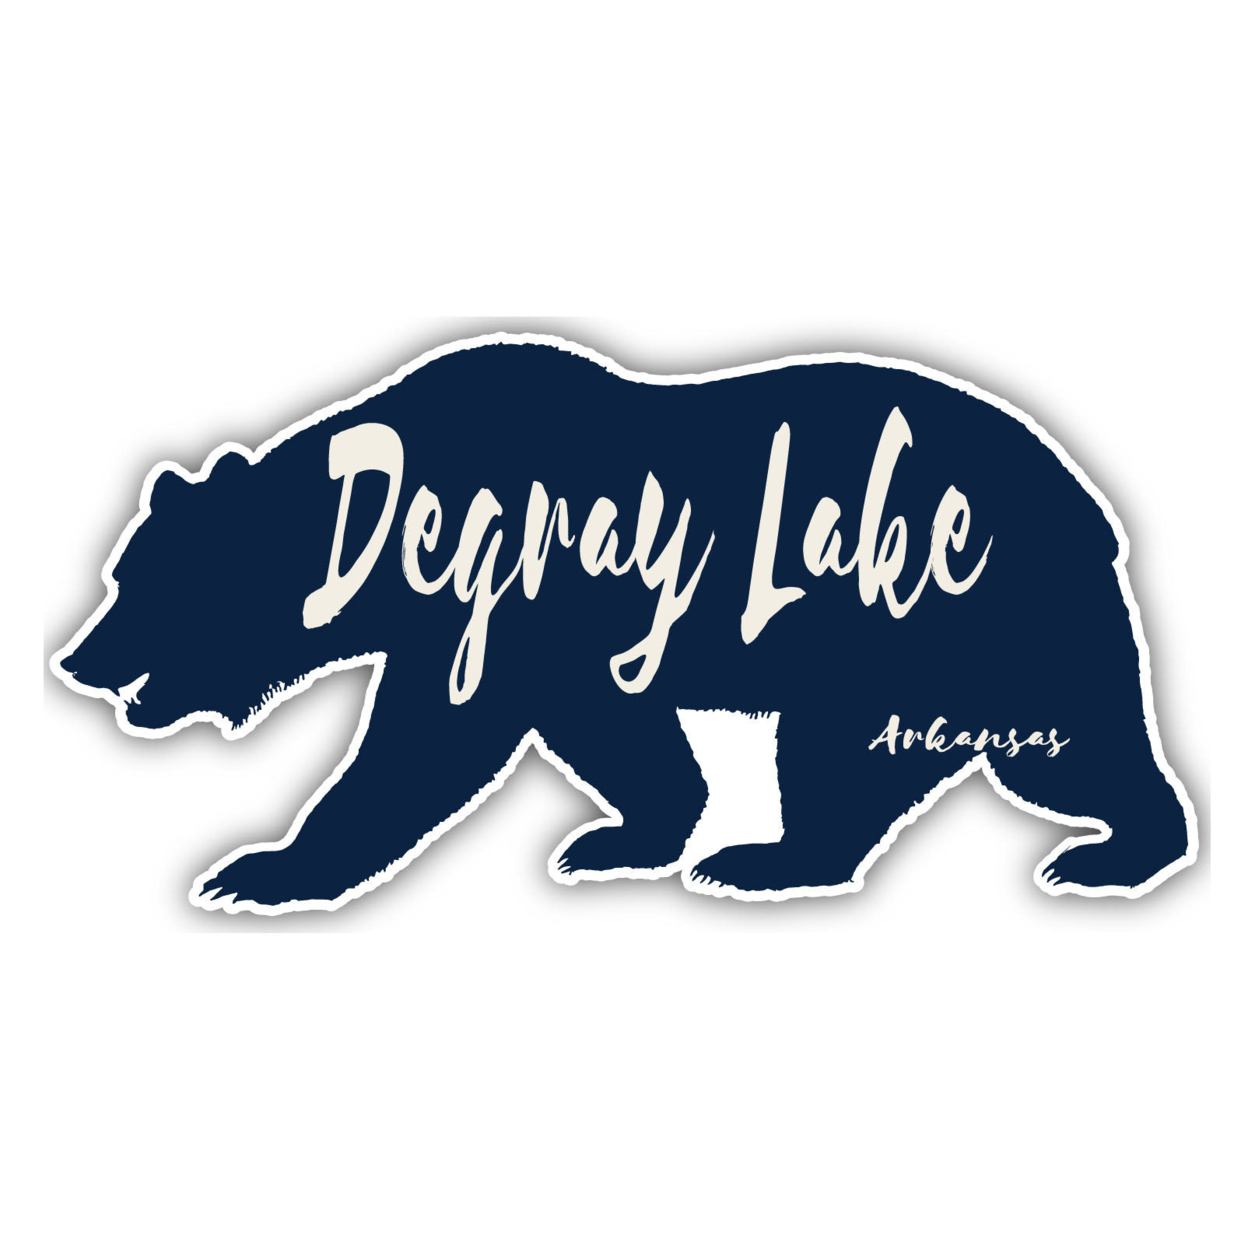 DeGray Lake Arkansas Souvenir Decorative Stickers (Choose Theme And Size) - 4-Pack, 10-Inch, Camp Life